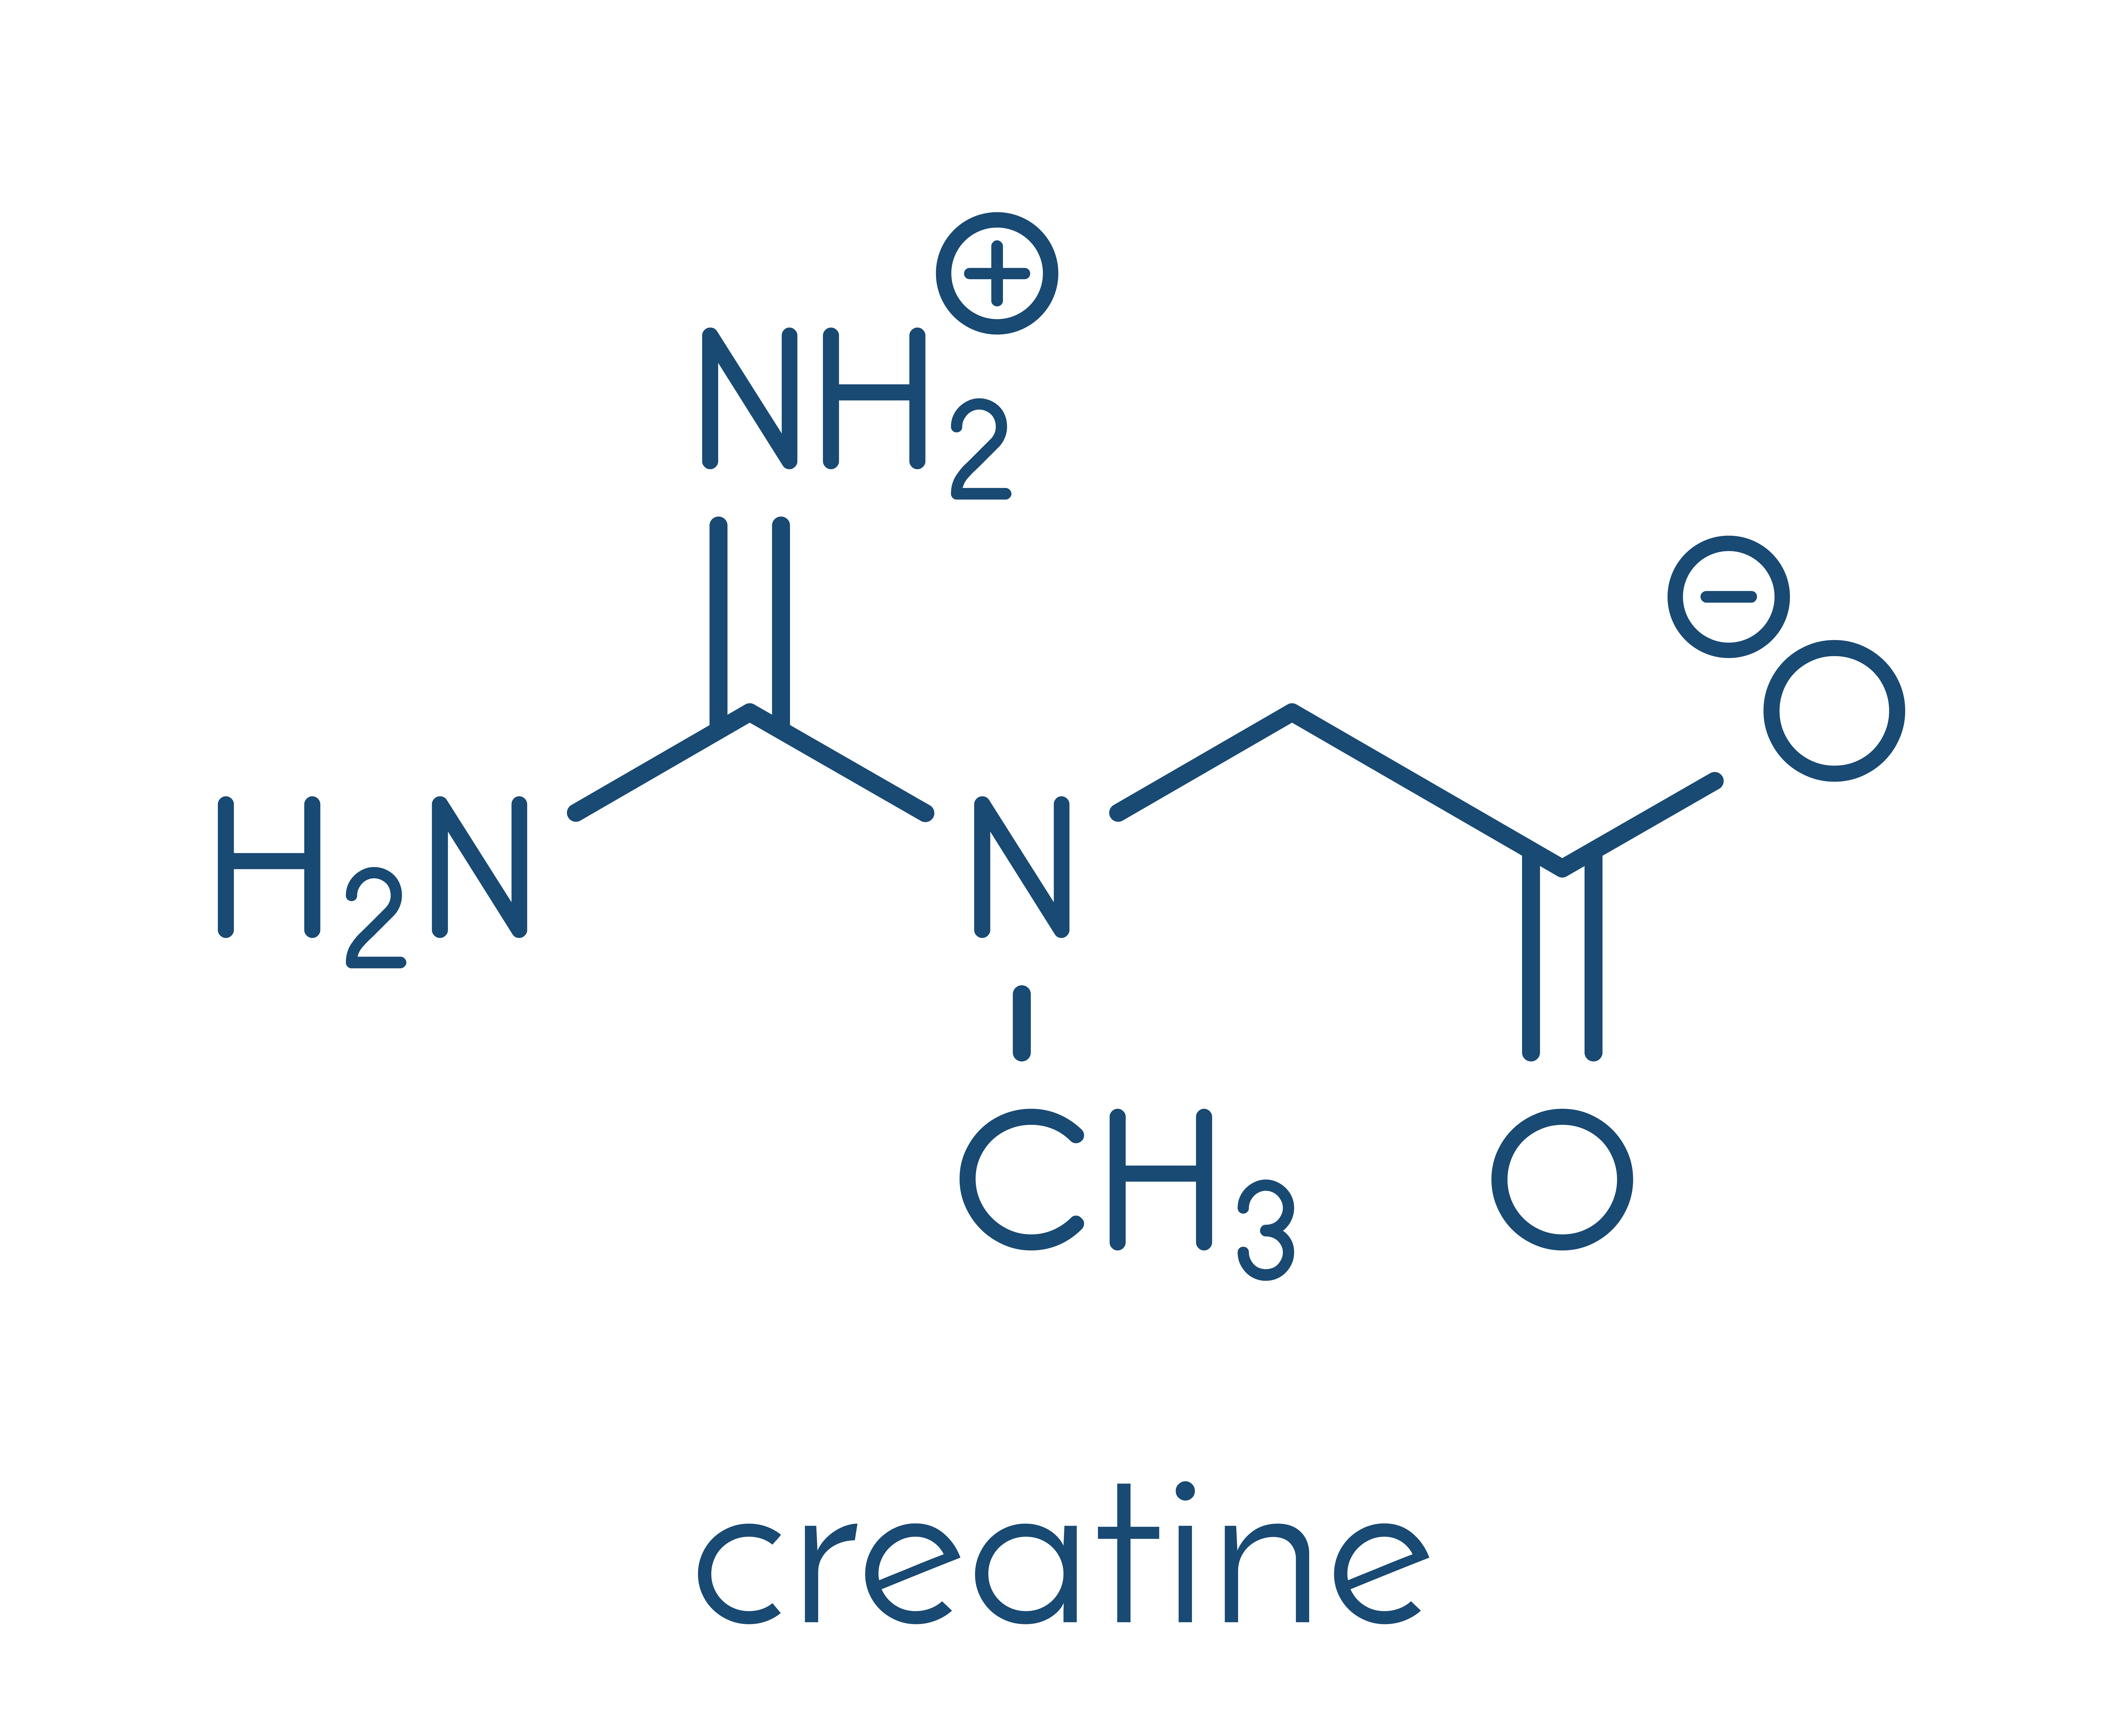 Creatine - the most effective and widely used supplement. If you haven't tried it already - now it's your chance!